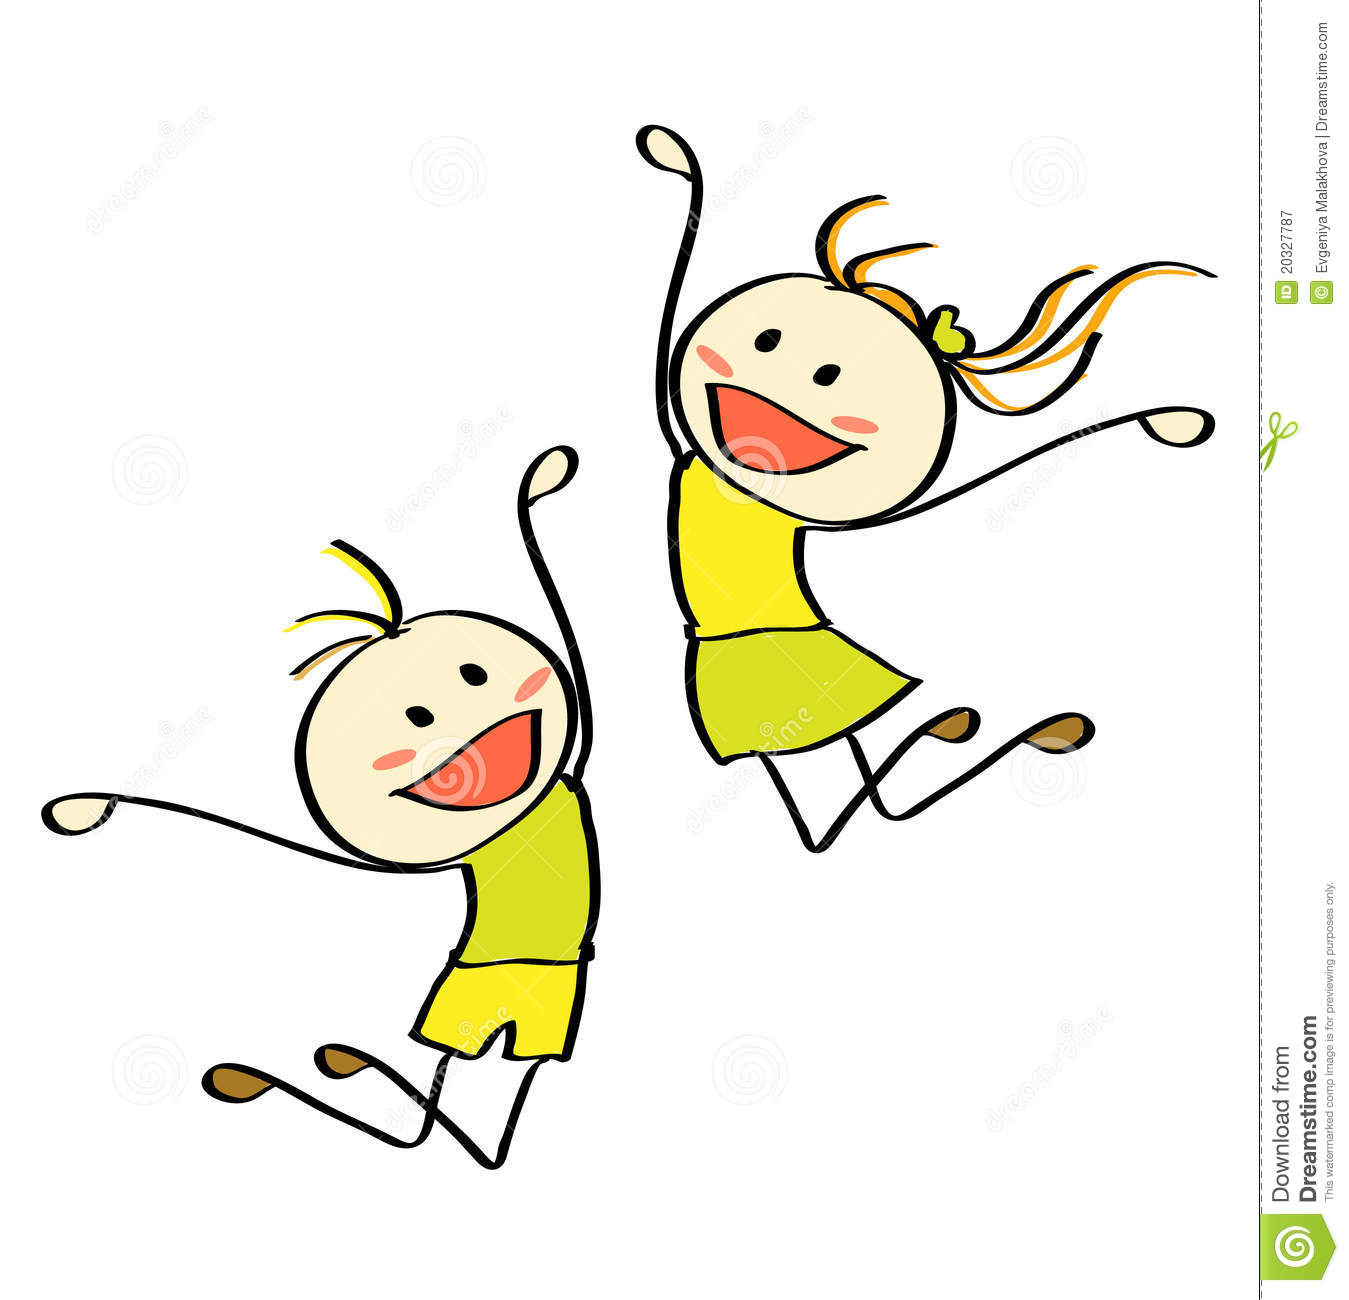 Jumping Kids Royalty Free Stock Photography   Image  20327787